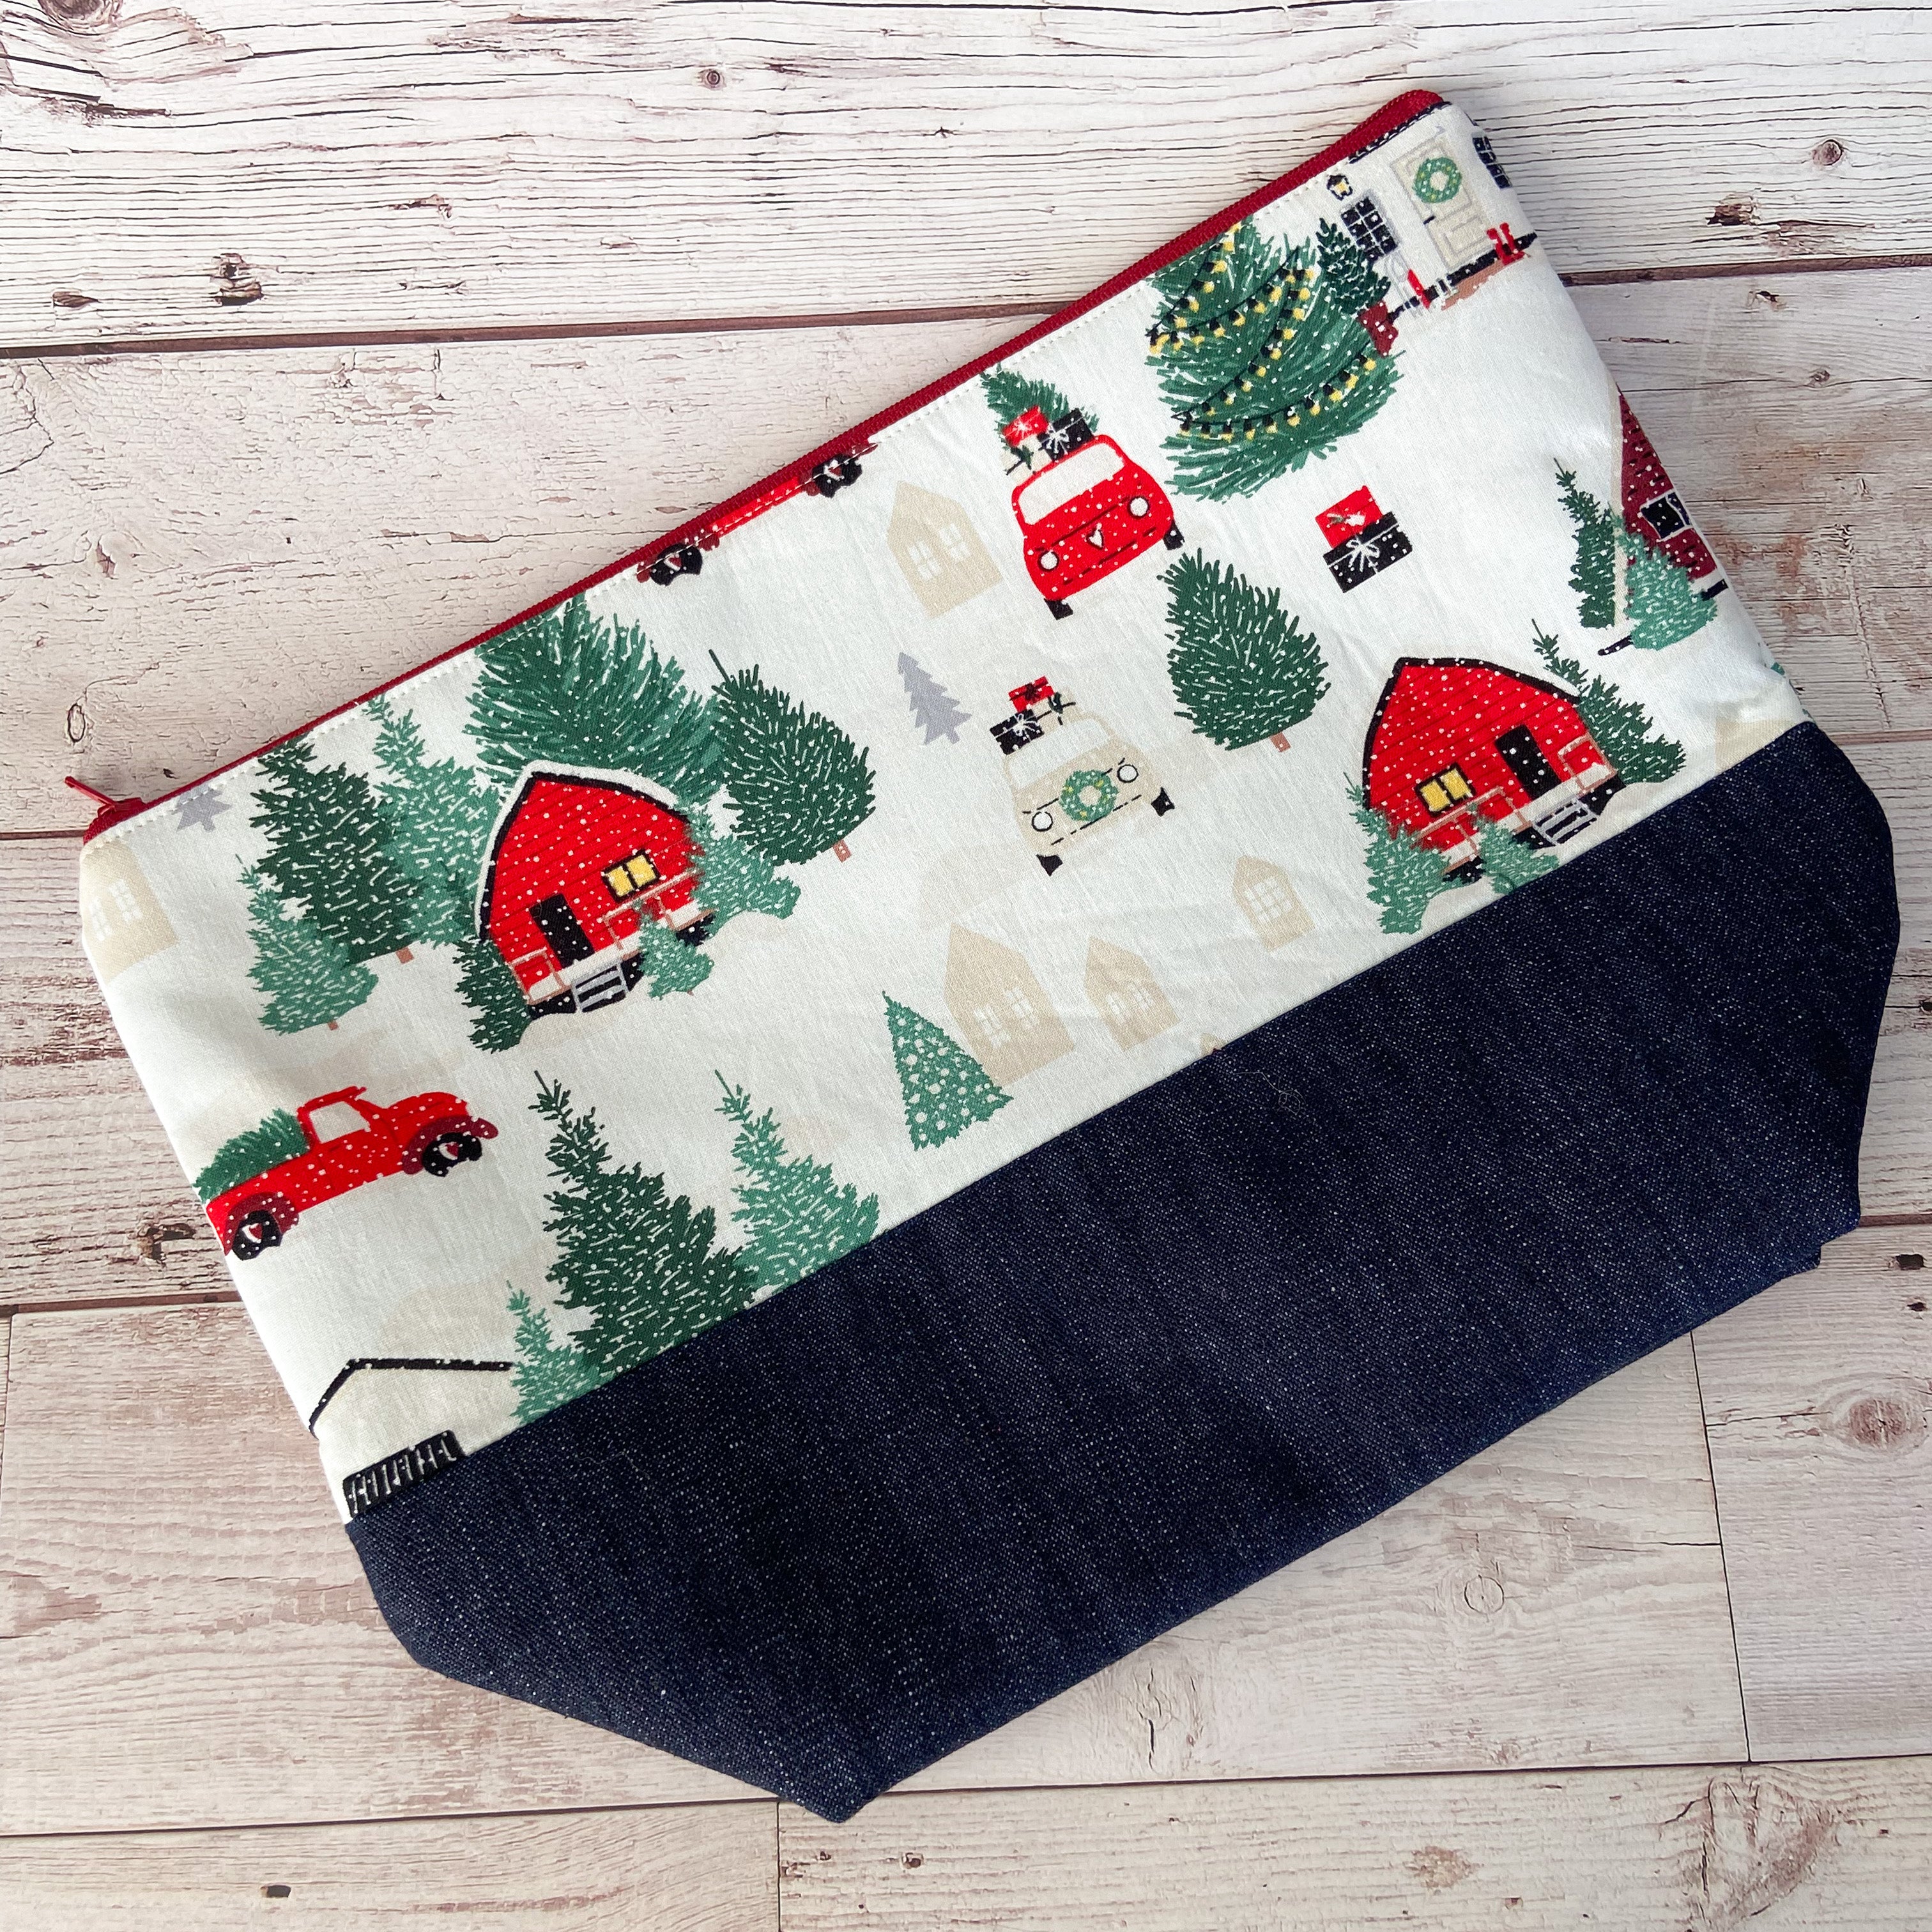 Denim - Large Zippered Project Bag - Going to the Cottage for Christmas